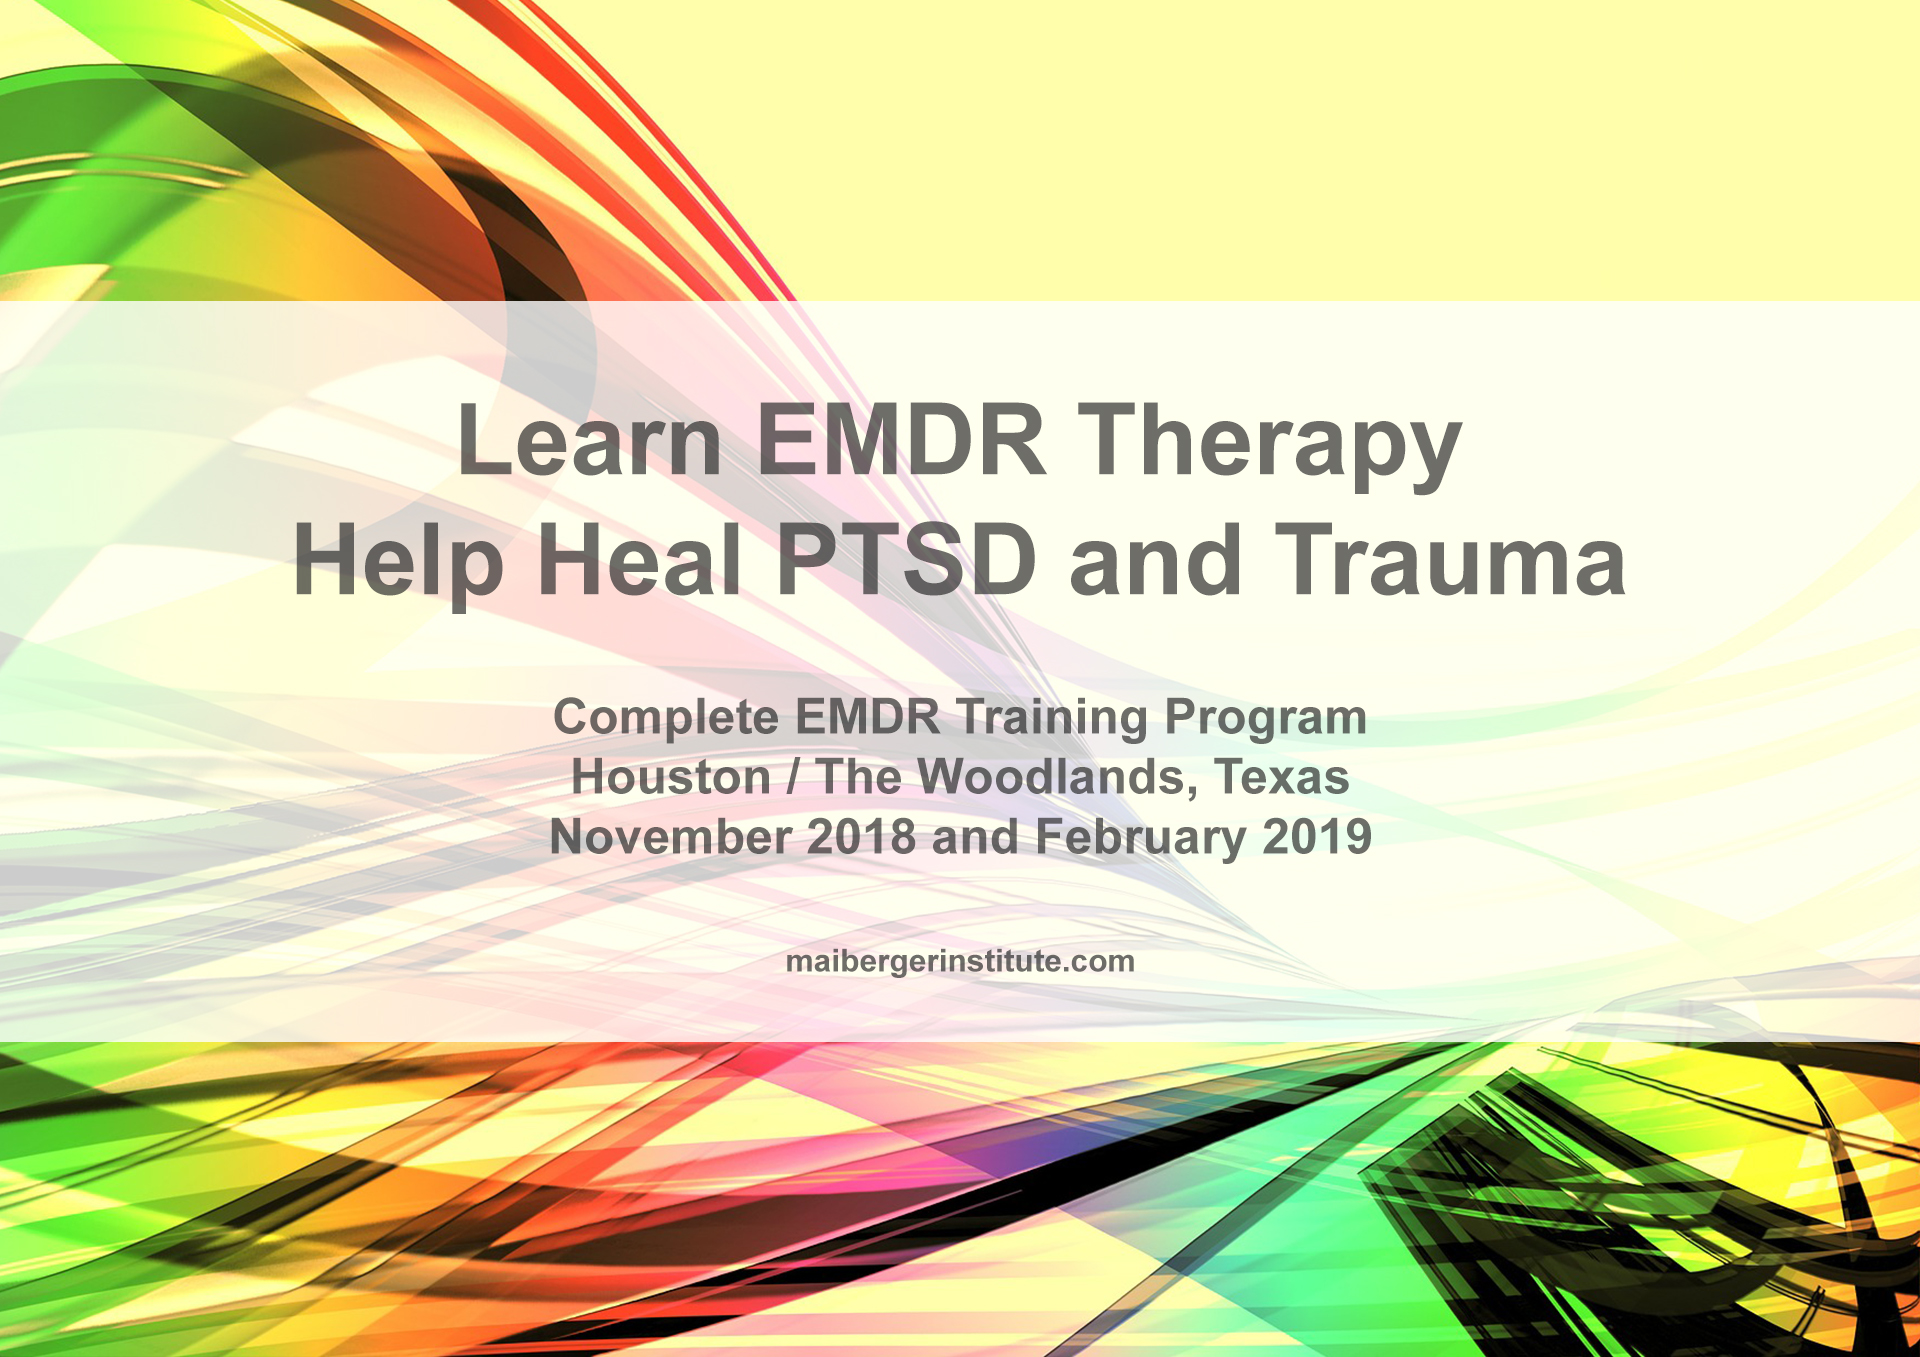 EMDR Training in Houston / The Woodlands, Texas November 2018 and